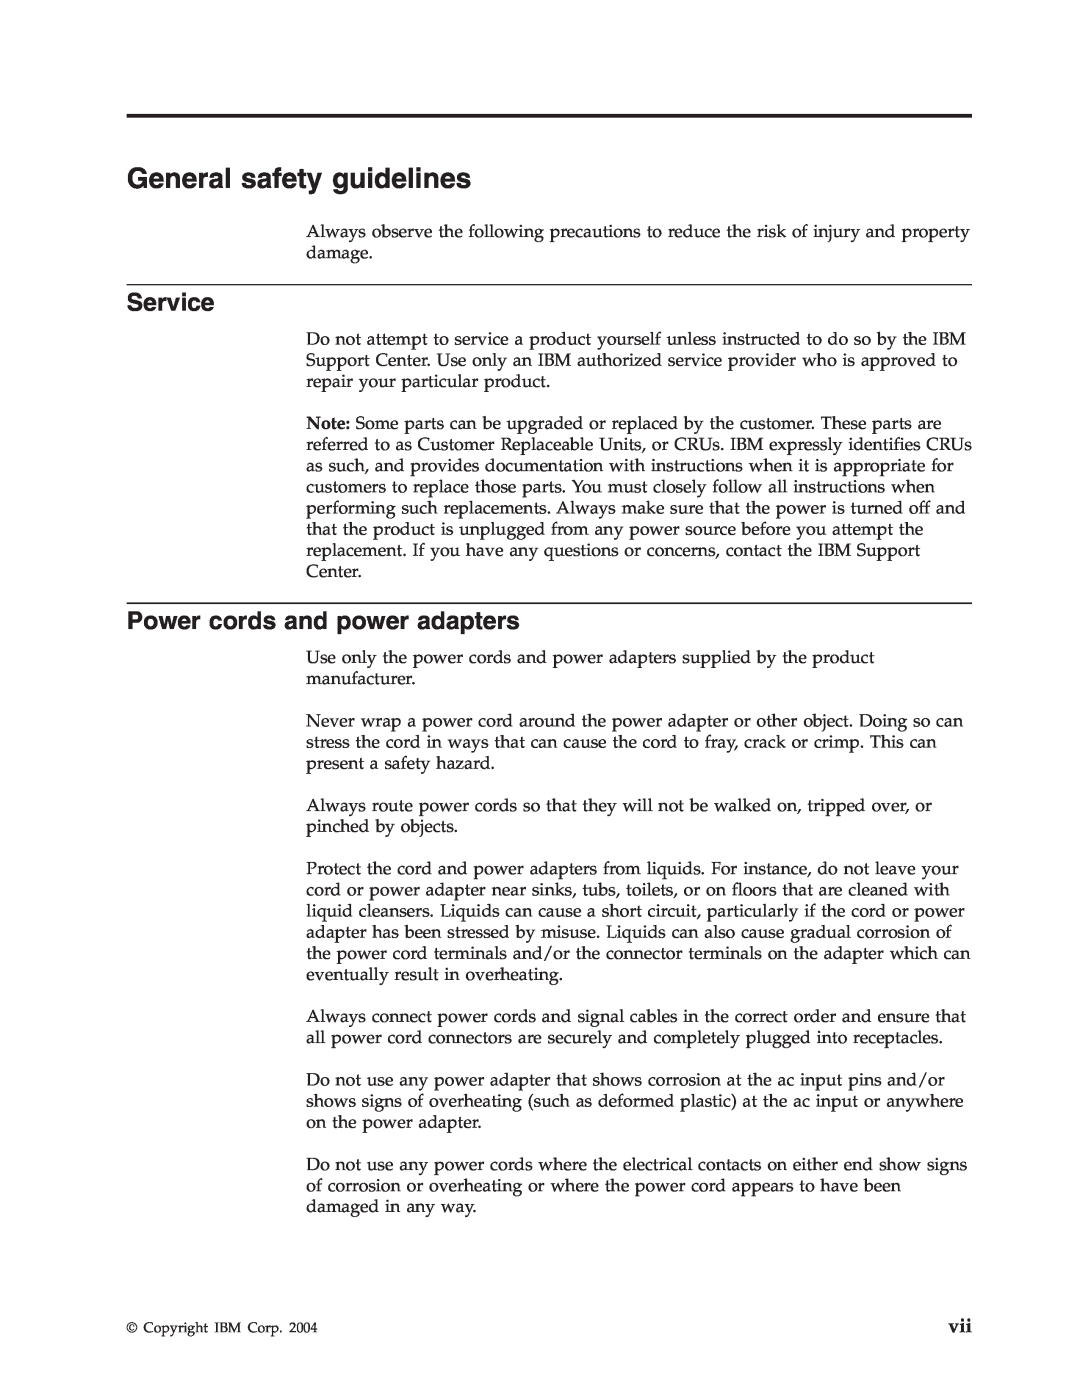 IBM 73P3315 manual General safety guidelines, Service, Power cords and power adapters 